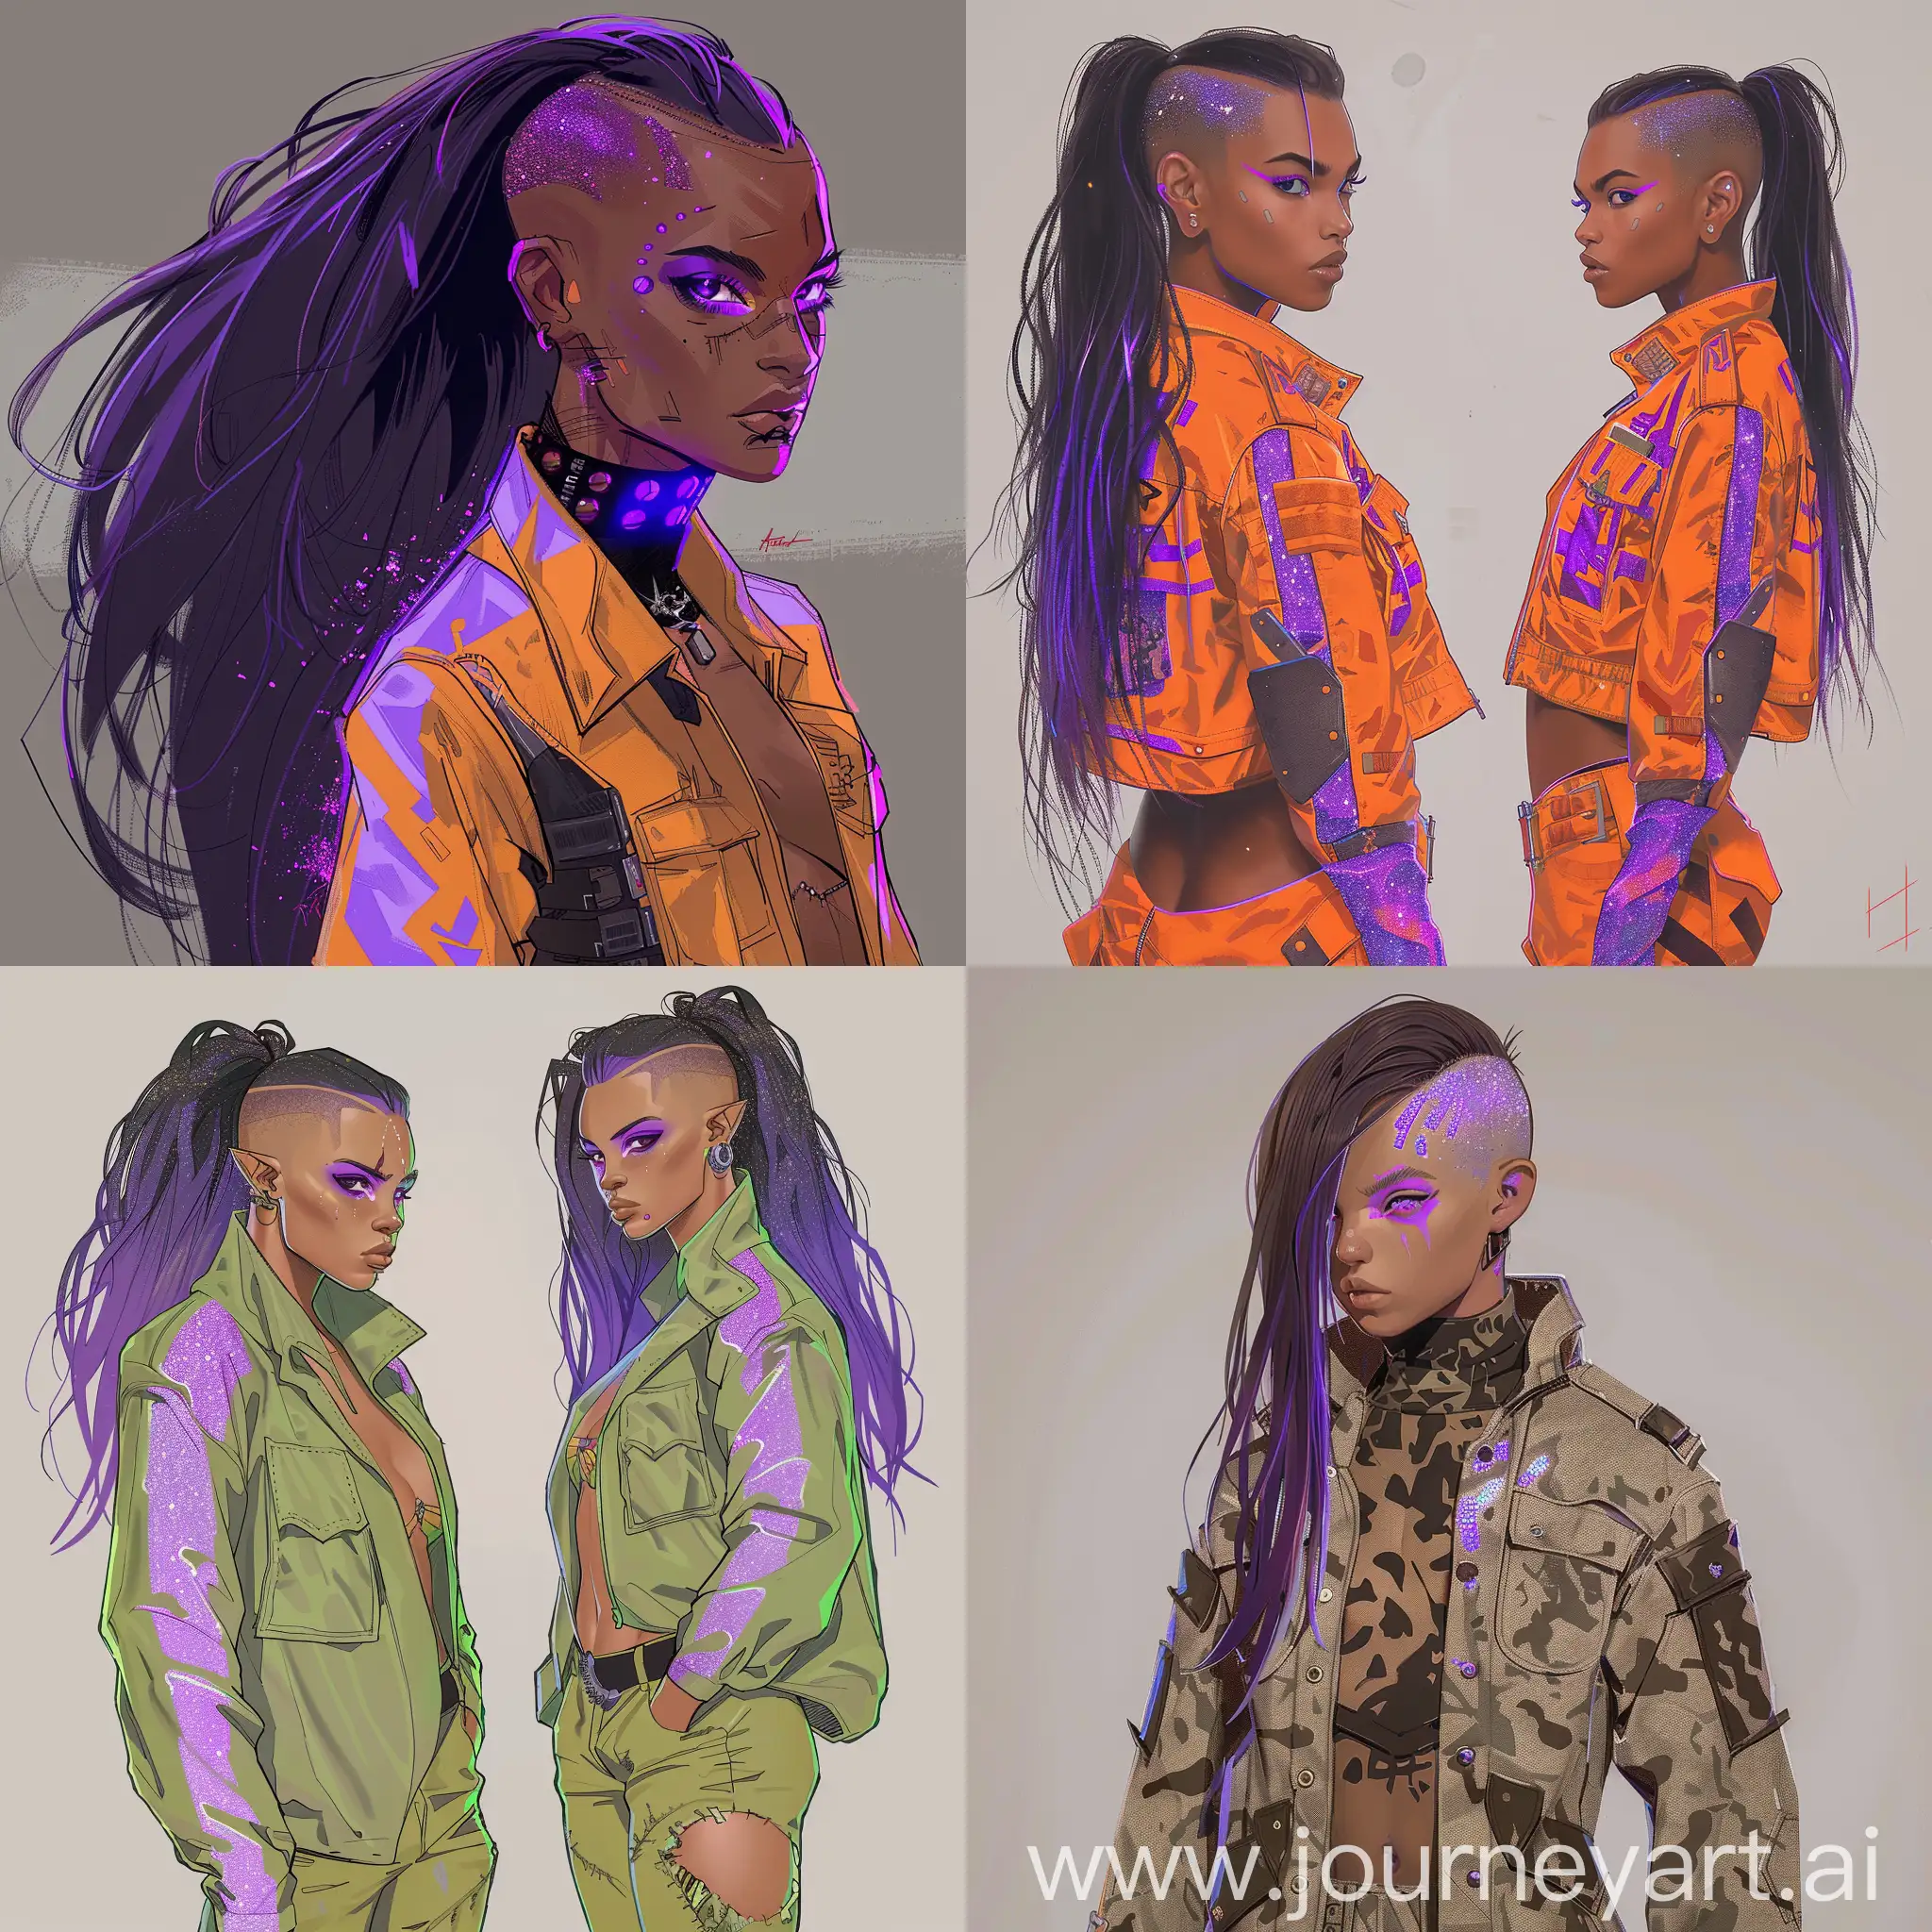 Full body, character design, concept art, character sheet, Race Profound, Female, Clothing Style Militaristic, Eye-purple color, unusually shaped irises, floor-length hair, strands on the sides, half shaved hair, Hair Color neon purple, glitter,  anime artstyle, semi realism artstyle